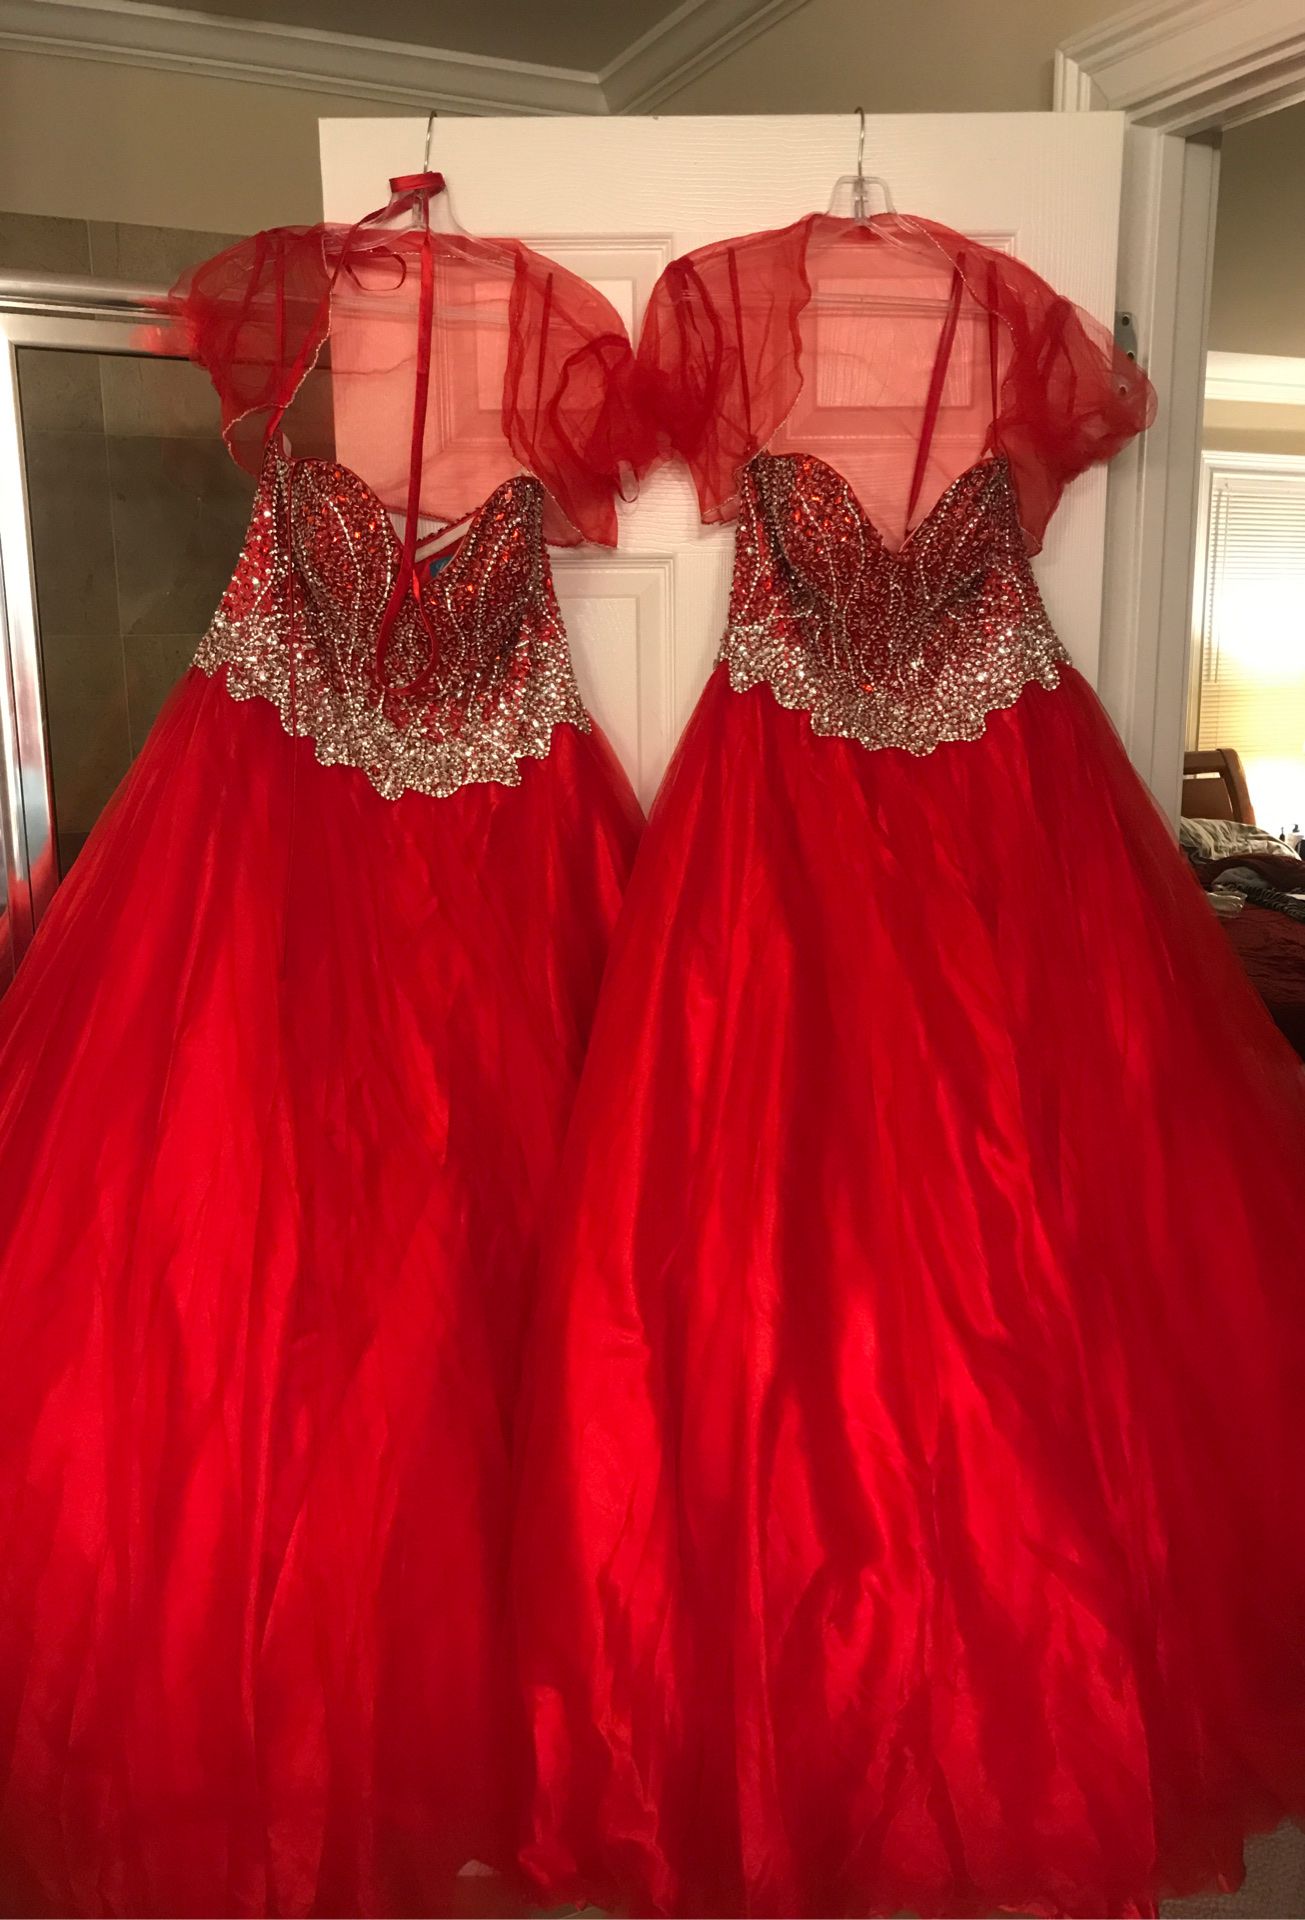 Prom Dress: Red Sweetheart Dress Beaded Bodice Ball Gown Prom Formal Corset Back Size 12 and Size 14 available